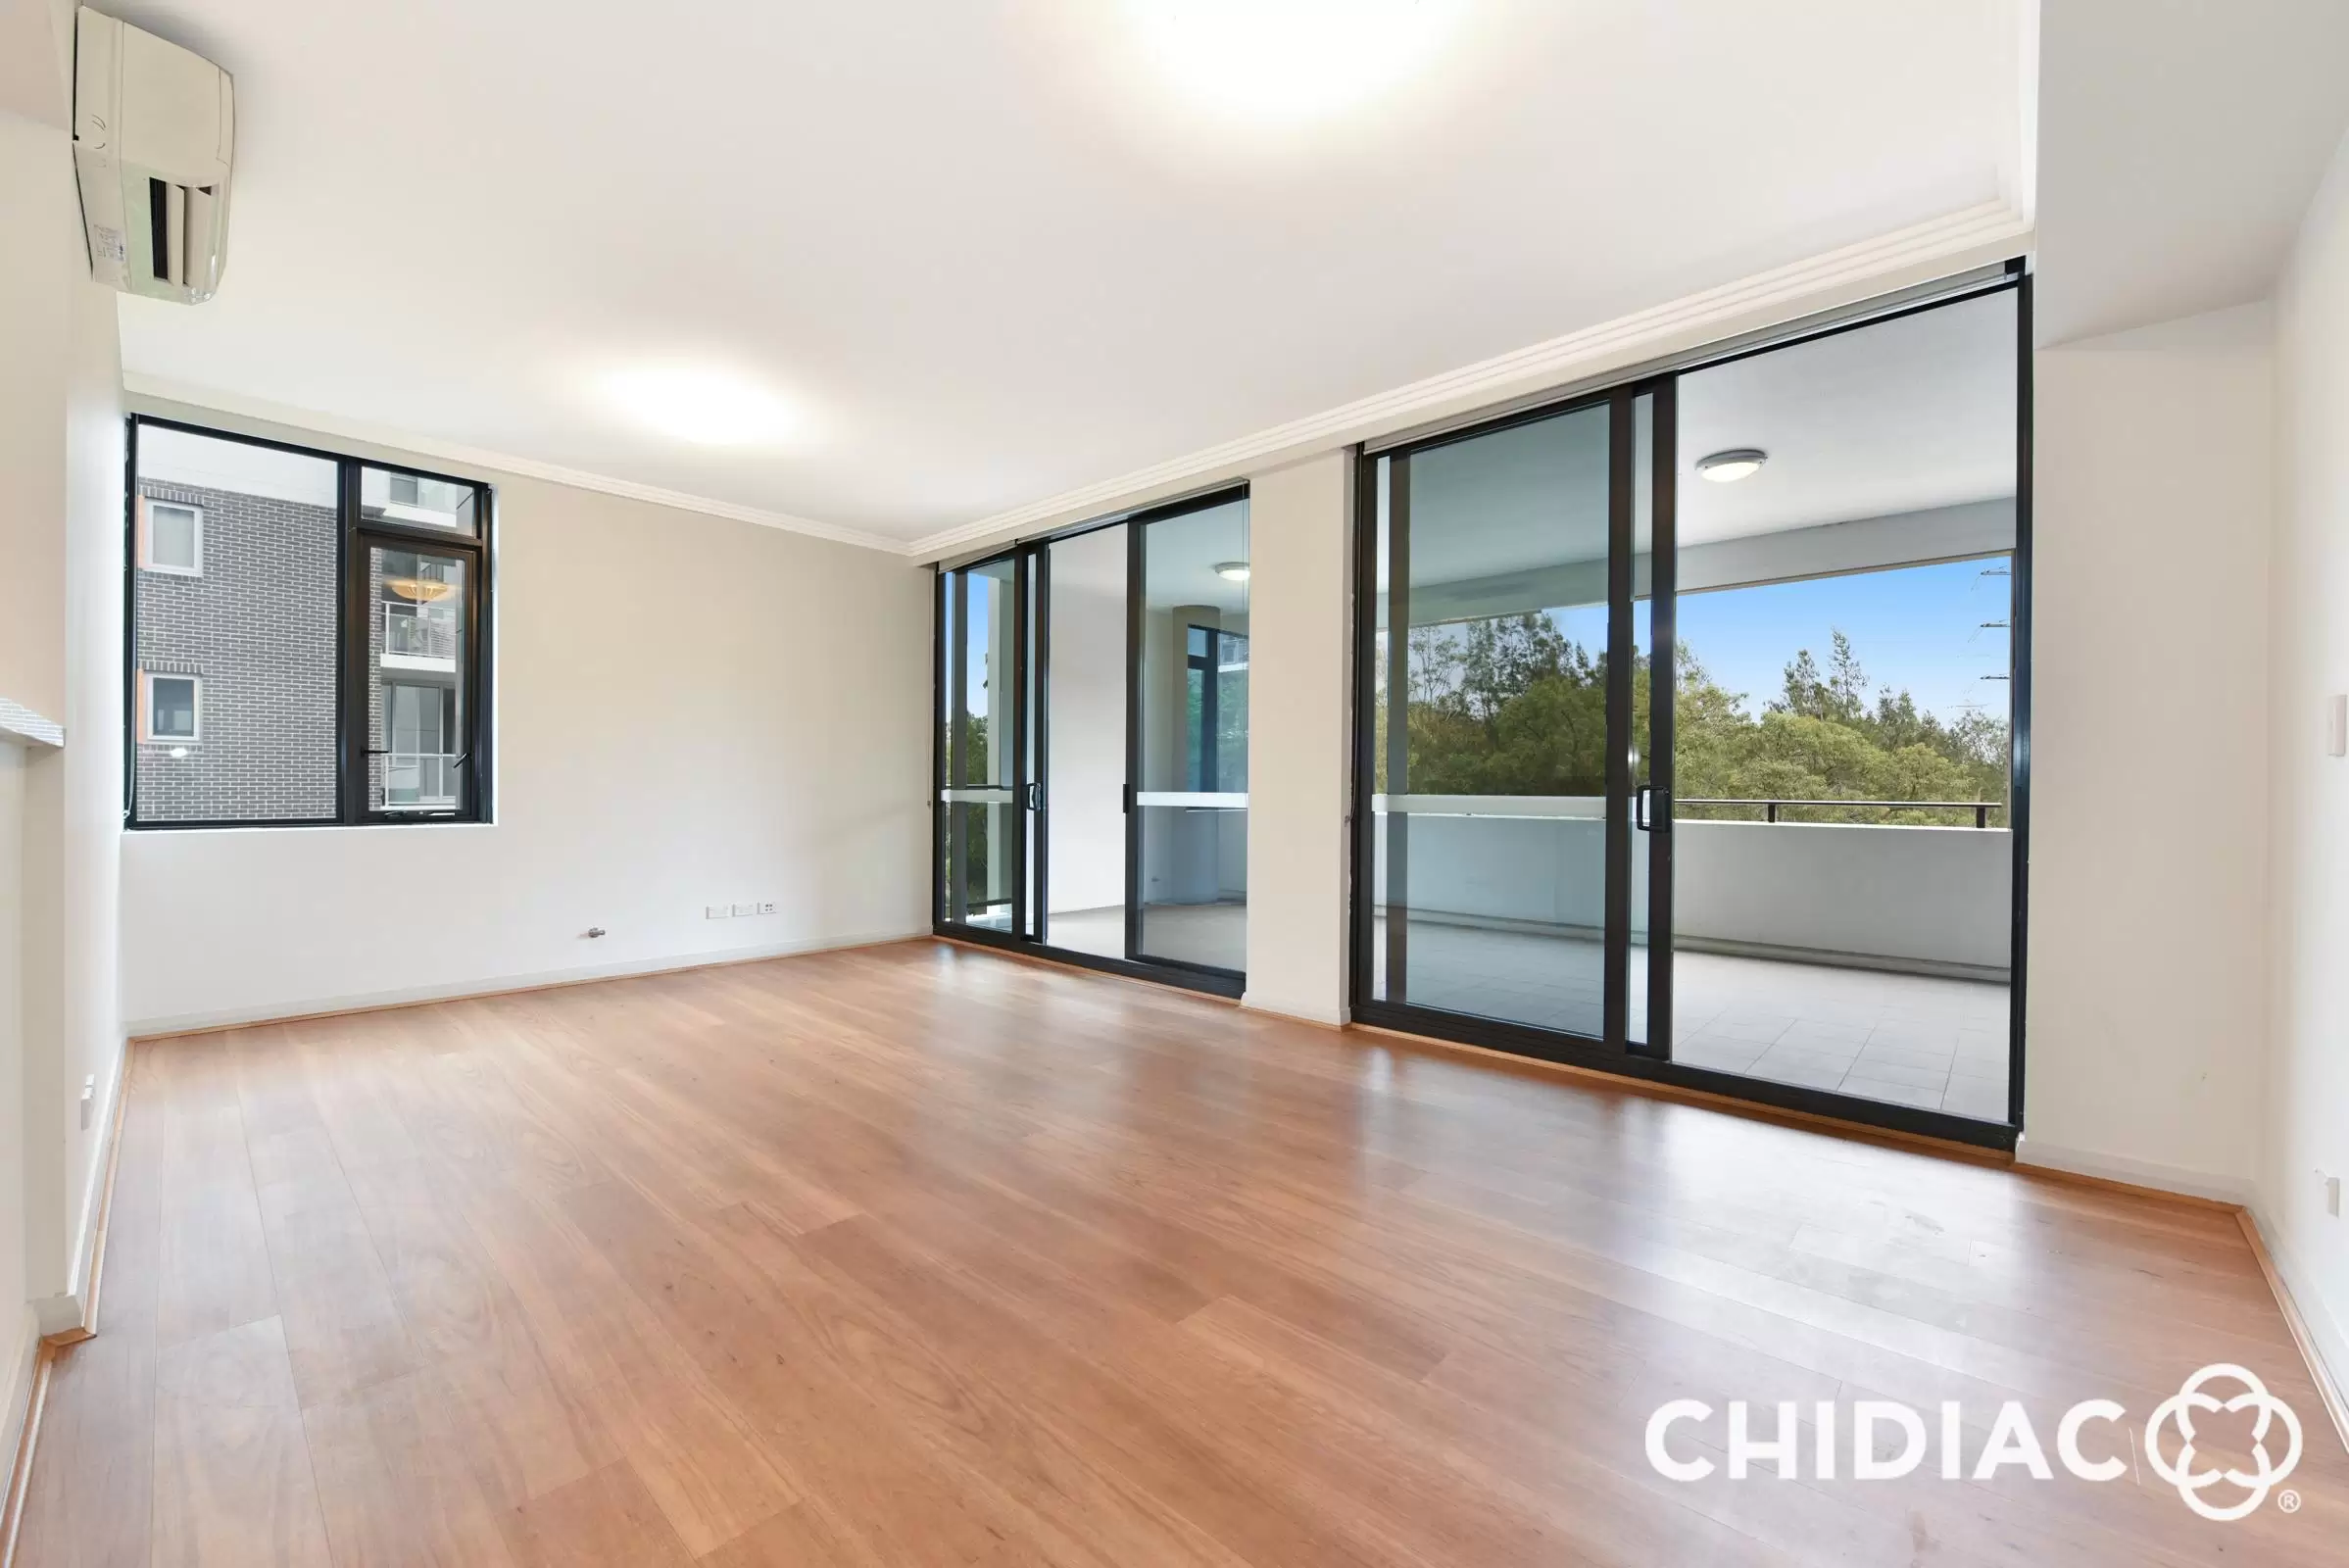 402/47 Hill Road, Wentworth Point Leased by Chidiac Realty - image 2